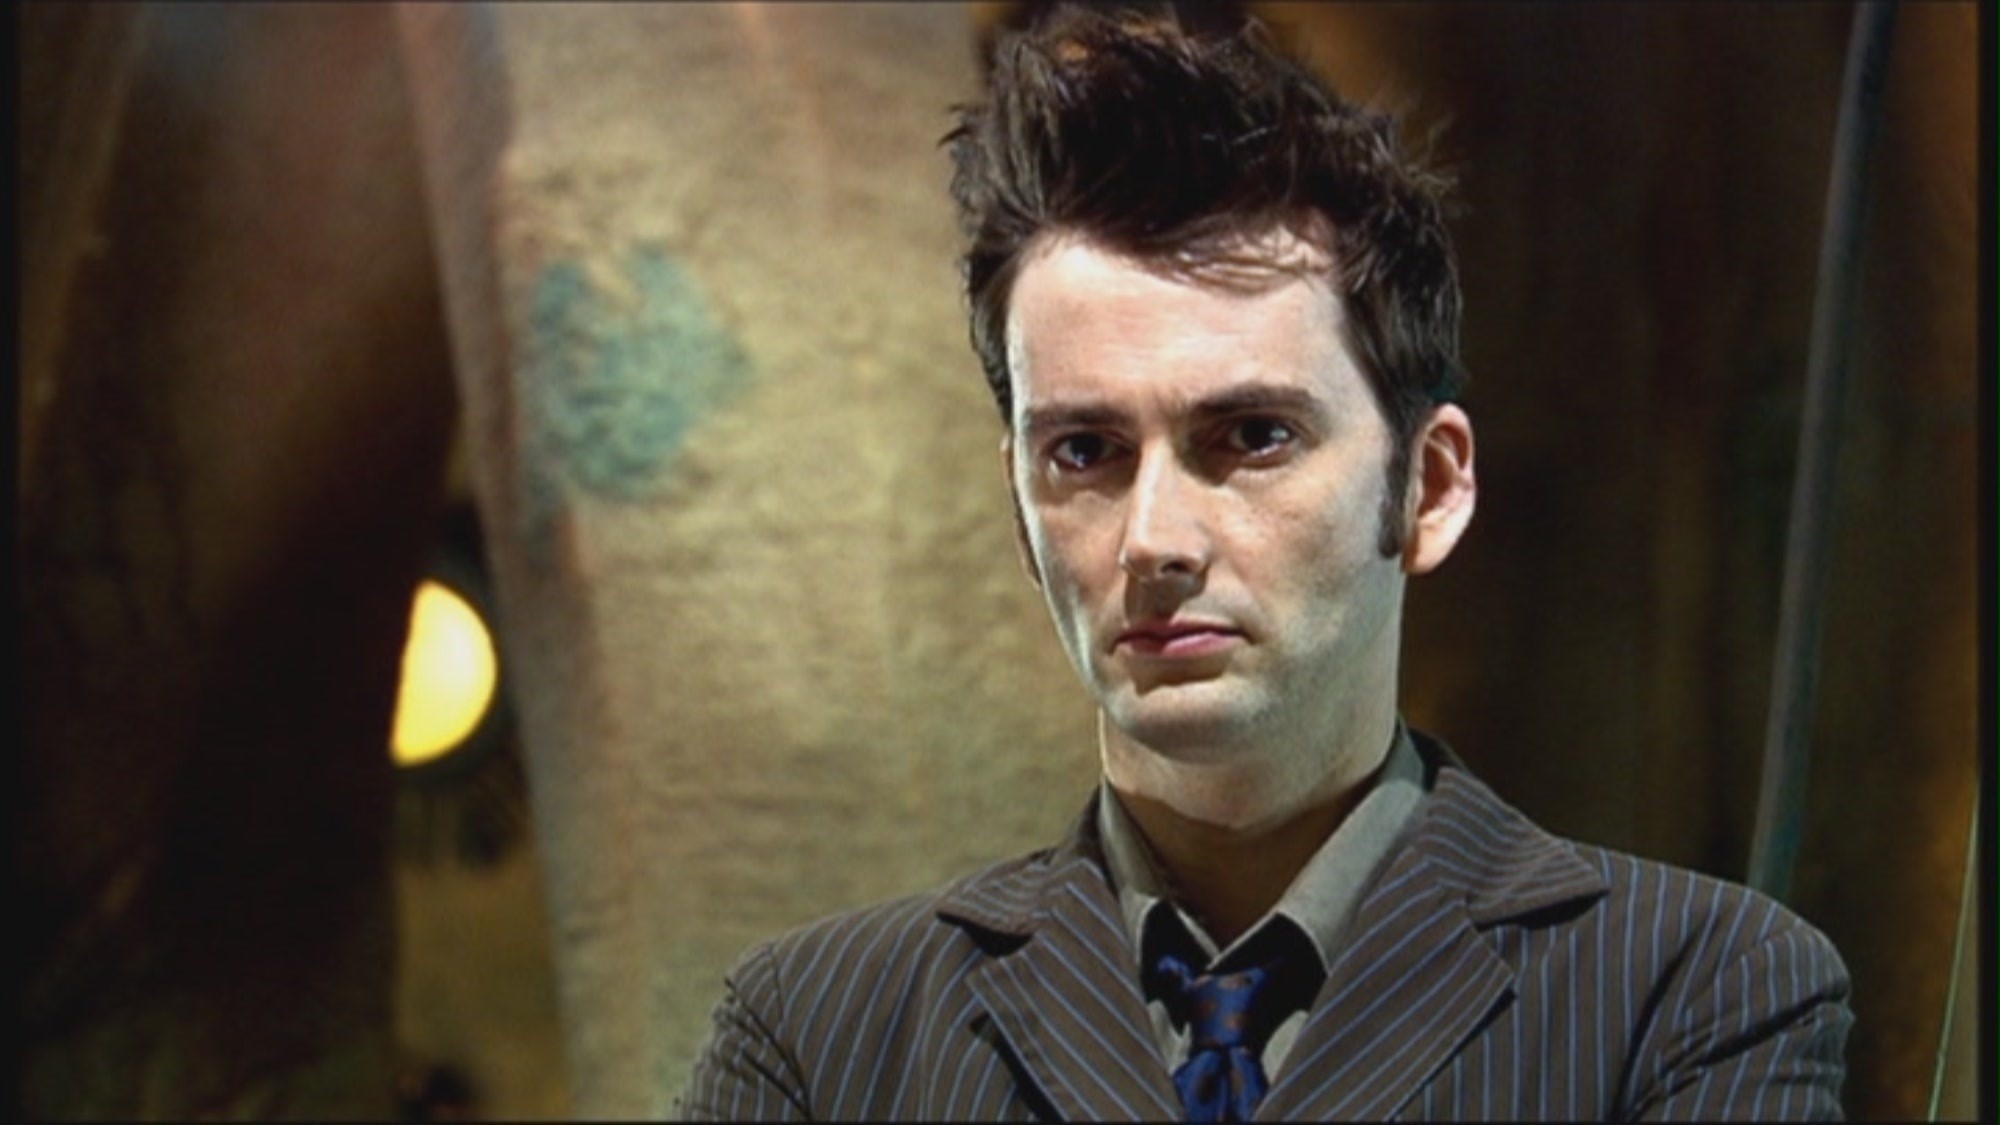 2000x1125 The Tenth Doctor images 3.09 - The Family of Blood HD wallpaper and  background photos